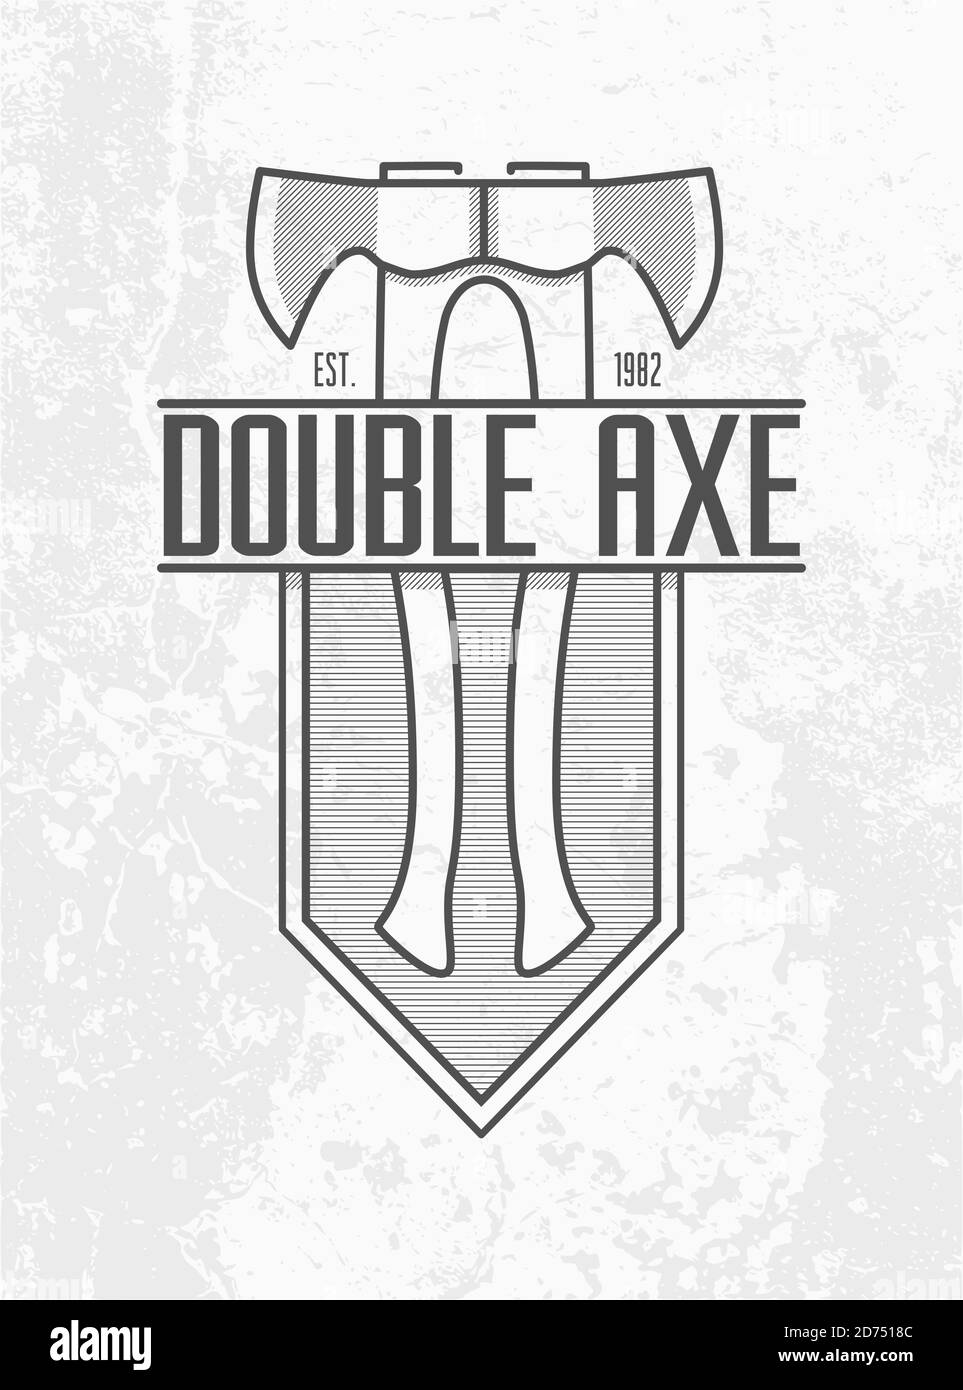 Monochrome Double ax logo on grey wall background. Two axes with a wooden handle on lined shield emblem design. Carpentry tool insignia. Stock Vector